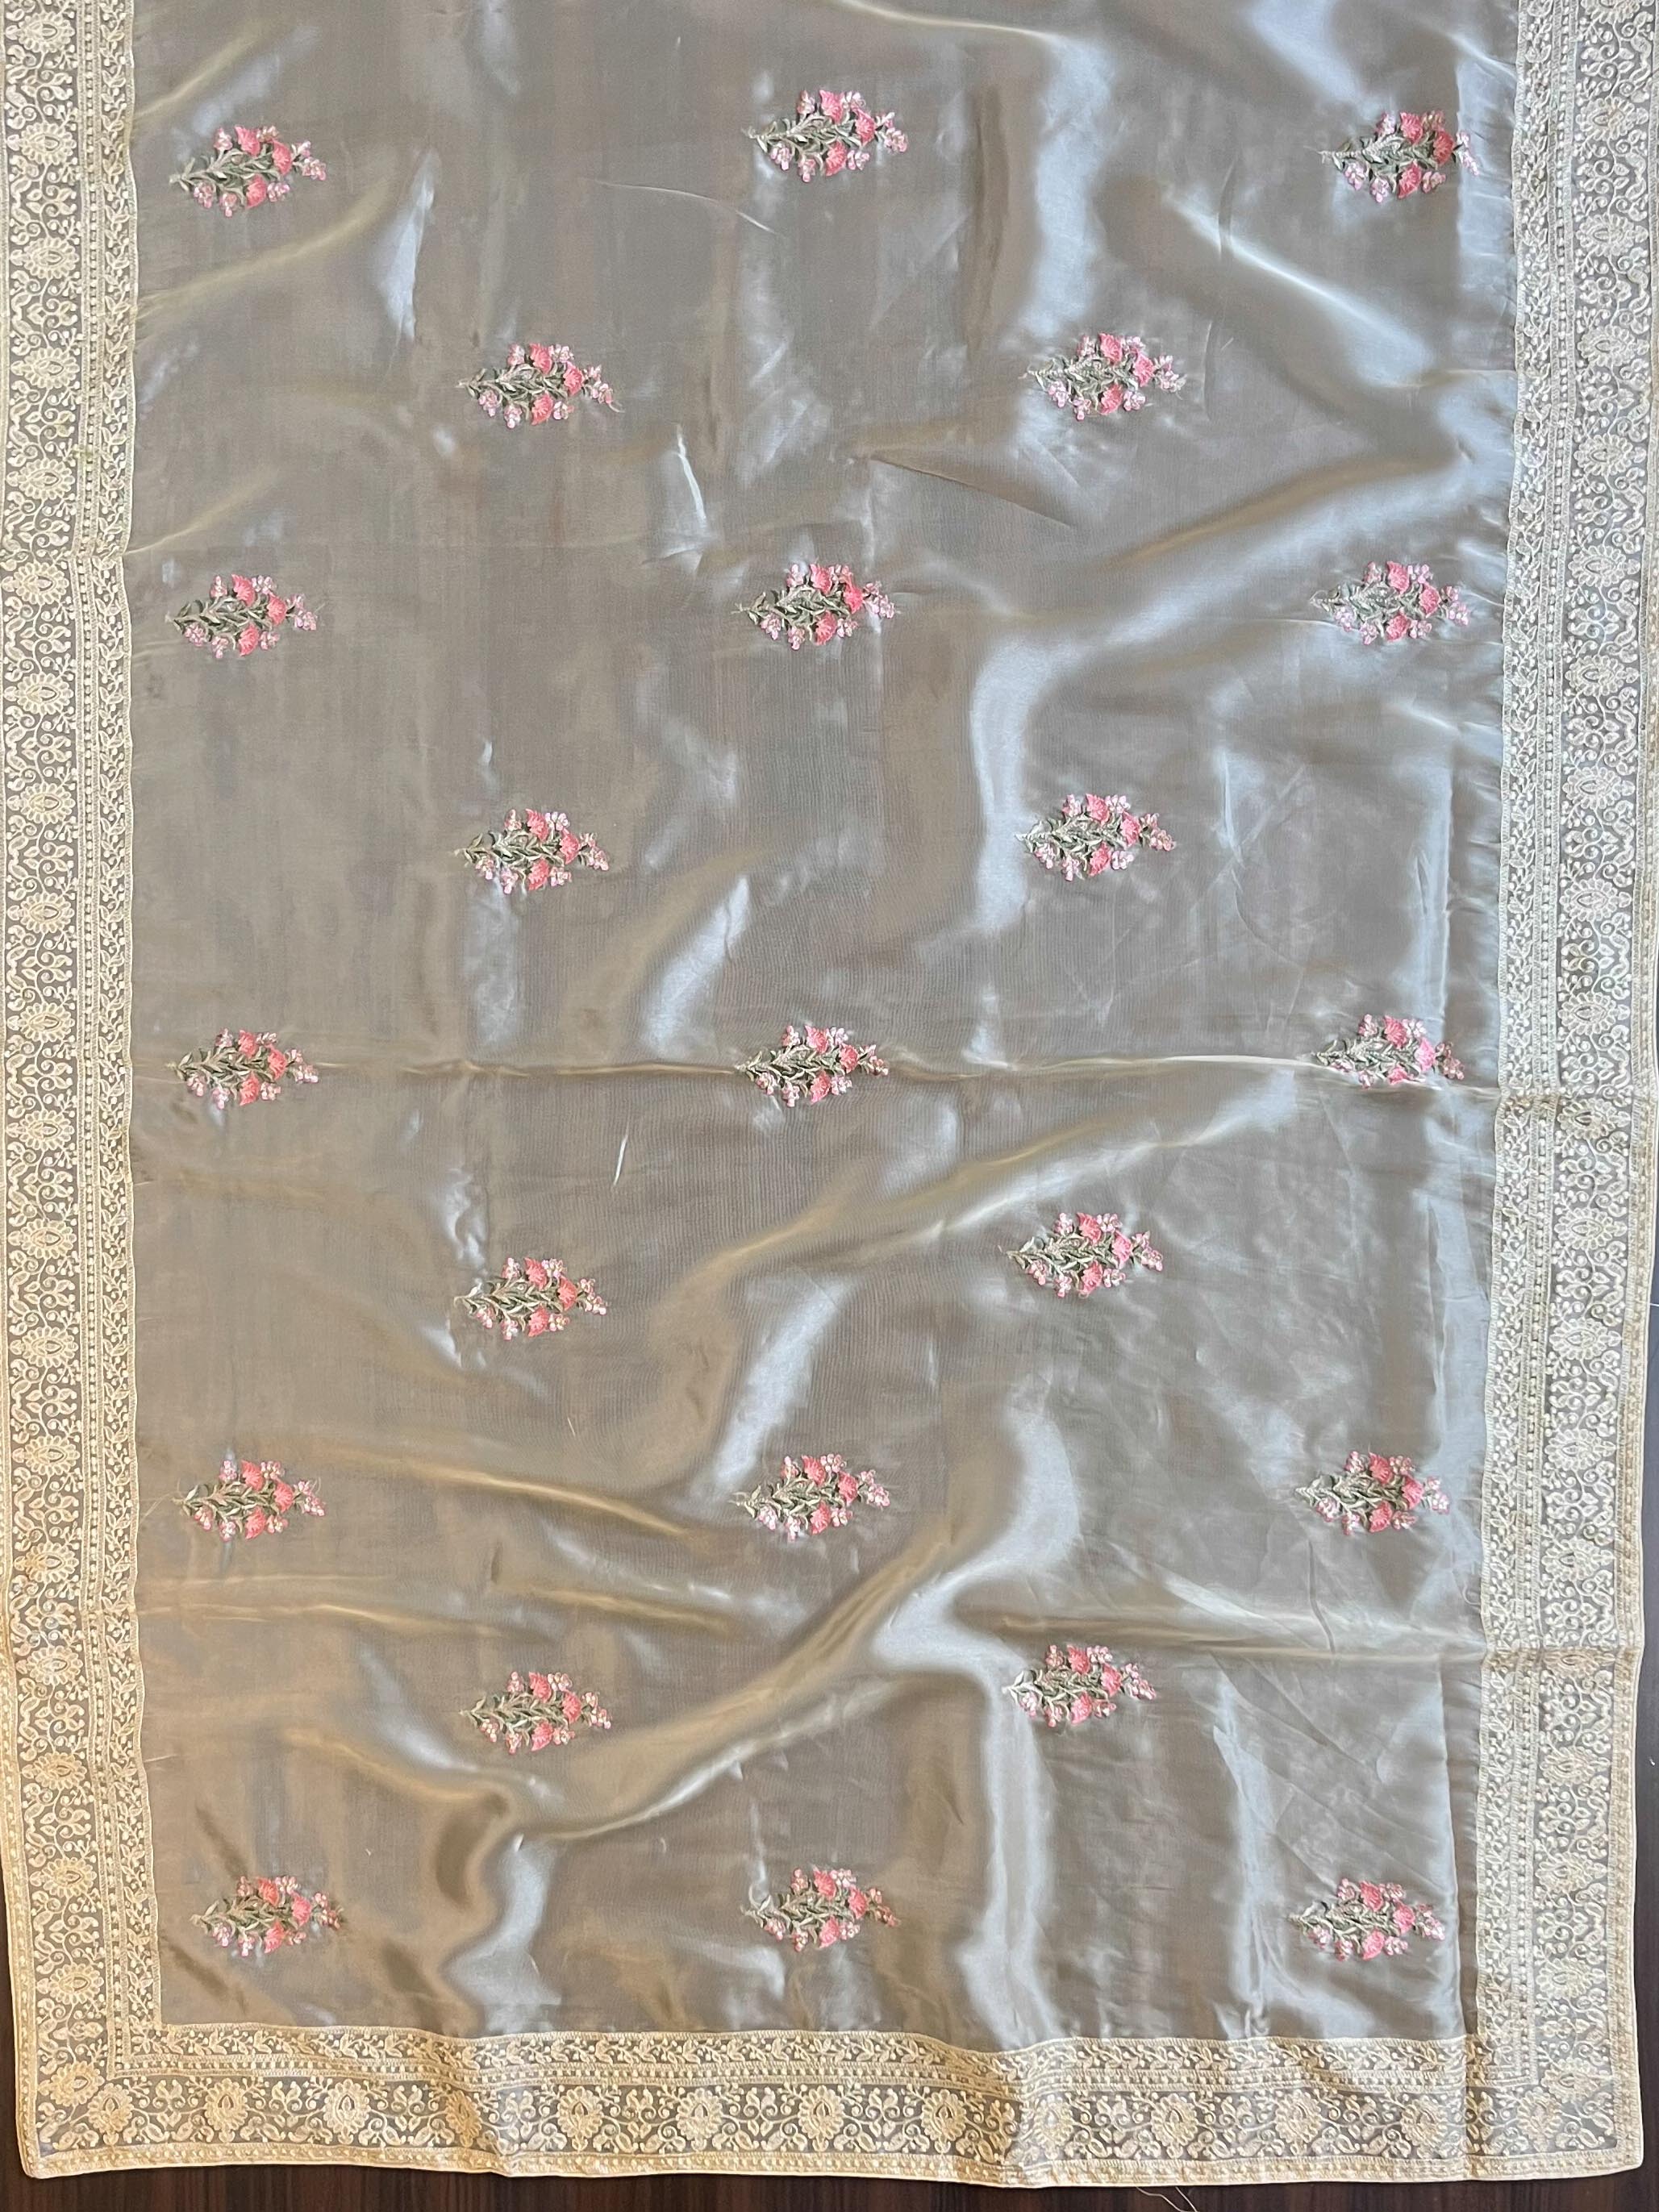 Banarasee Handwoven Organza Silk Floral Embroidery Saree With Contrast Silk Blouse-Fawn & Peach